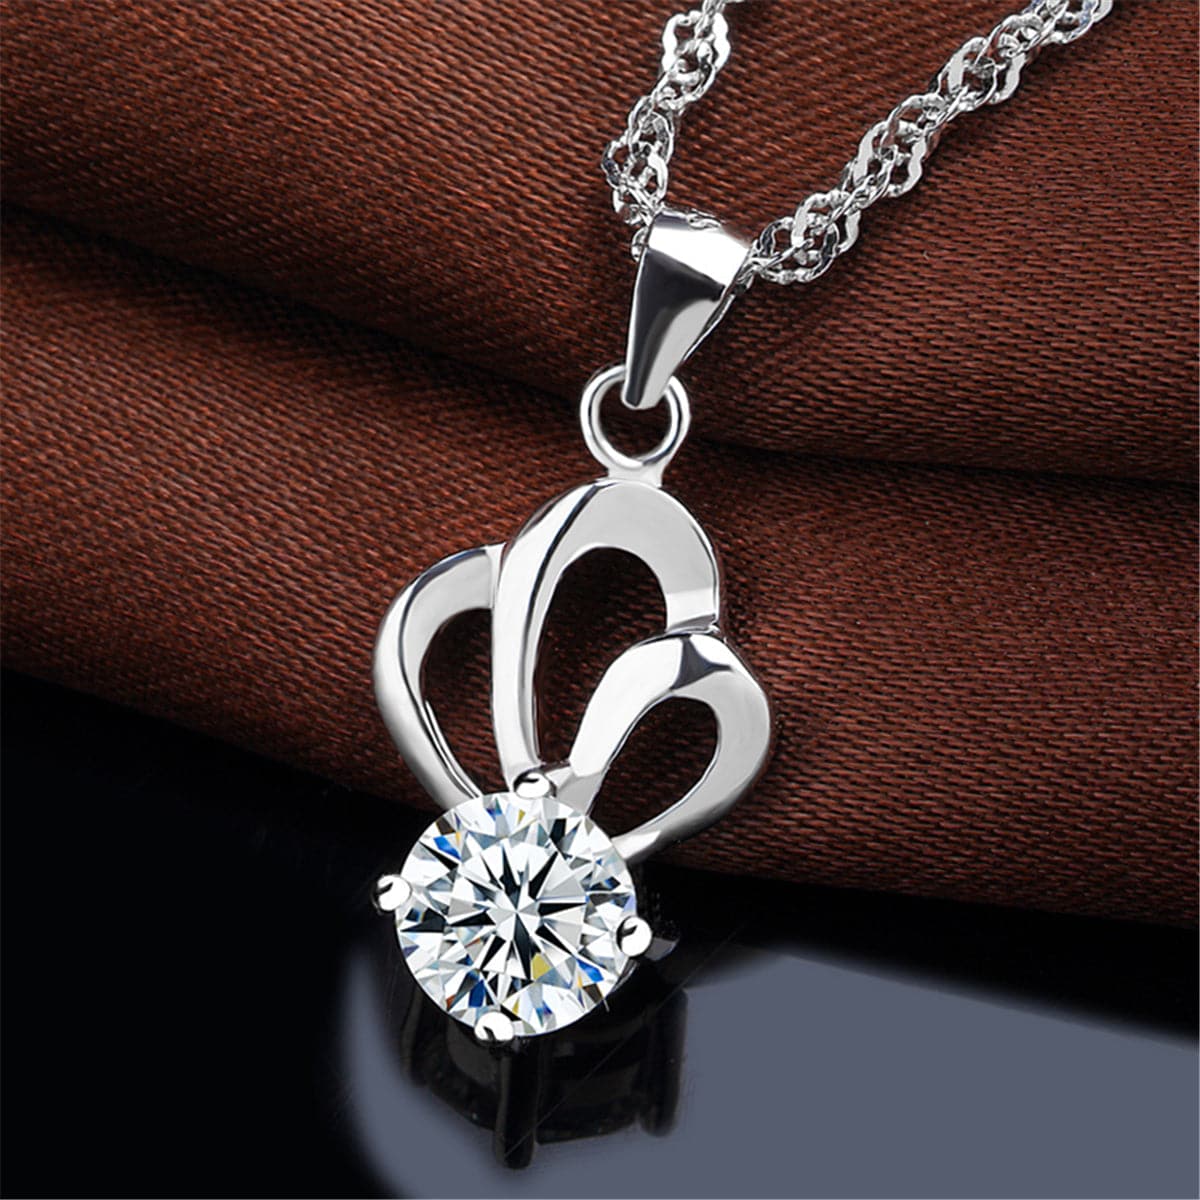 Cubic Zirconia & Sterling Silver Scalloped Pendant Necklace